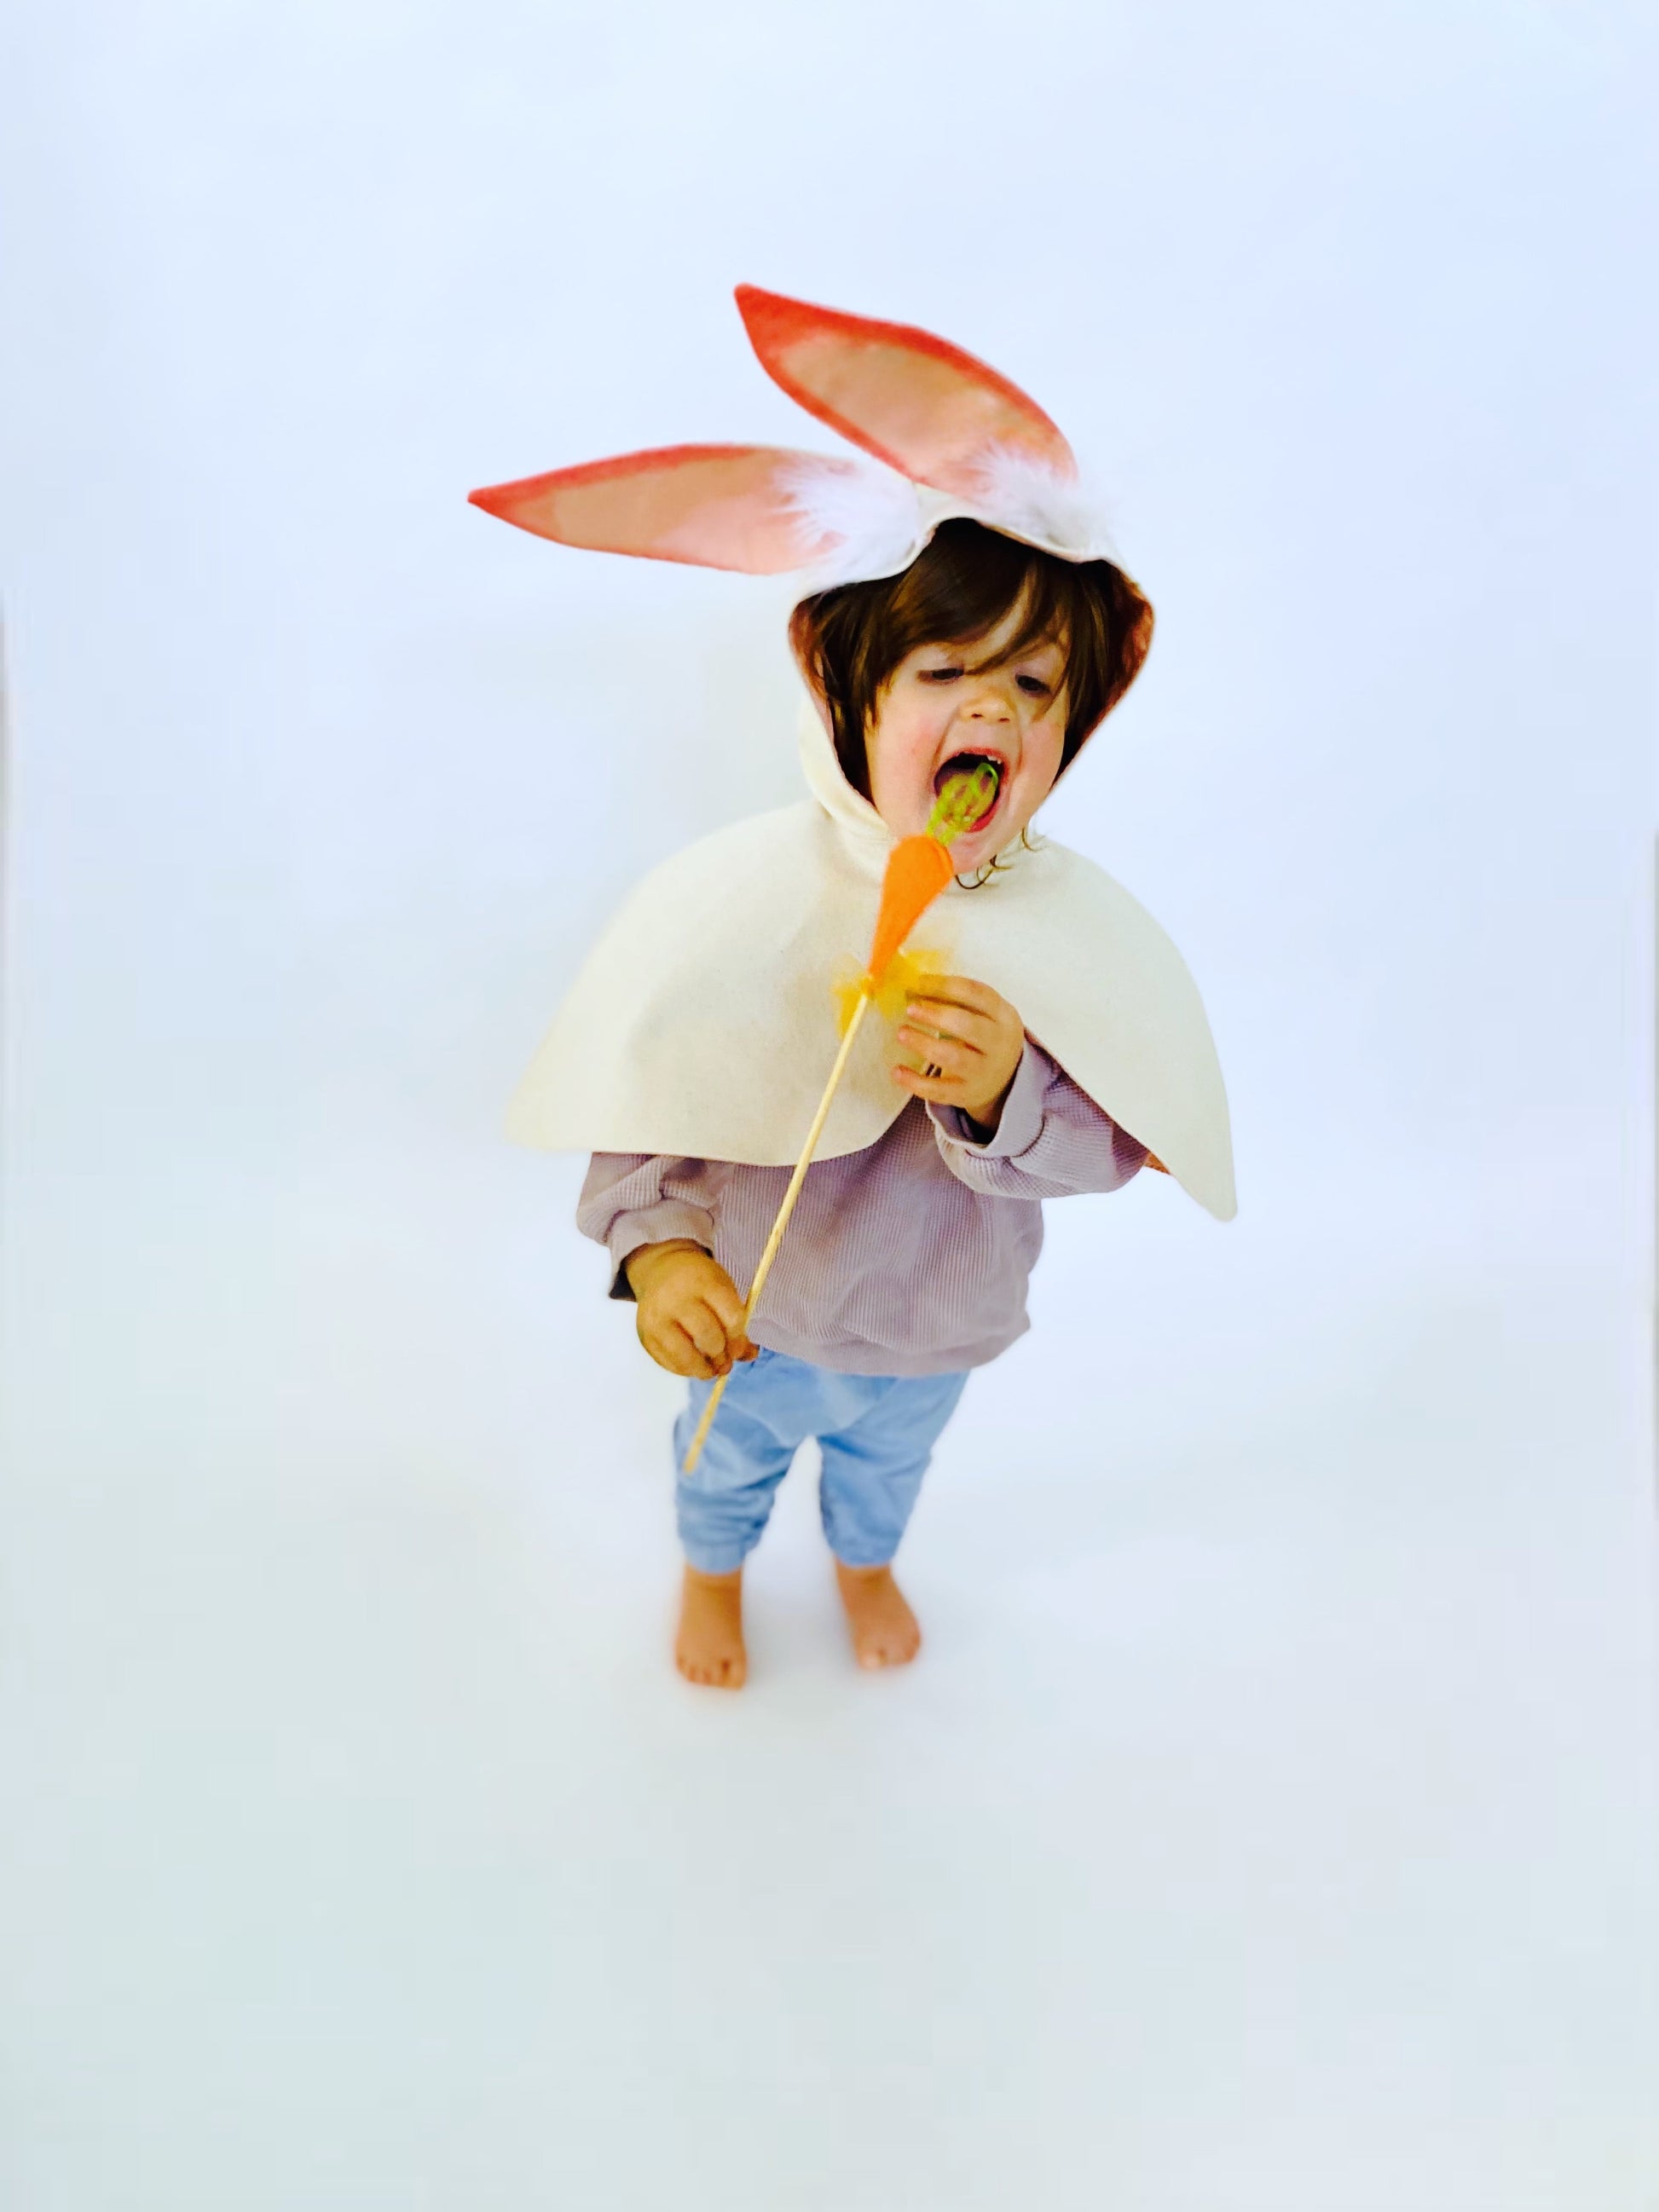 Carrot wand and Bunny Rabbit costume.